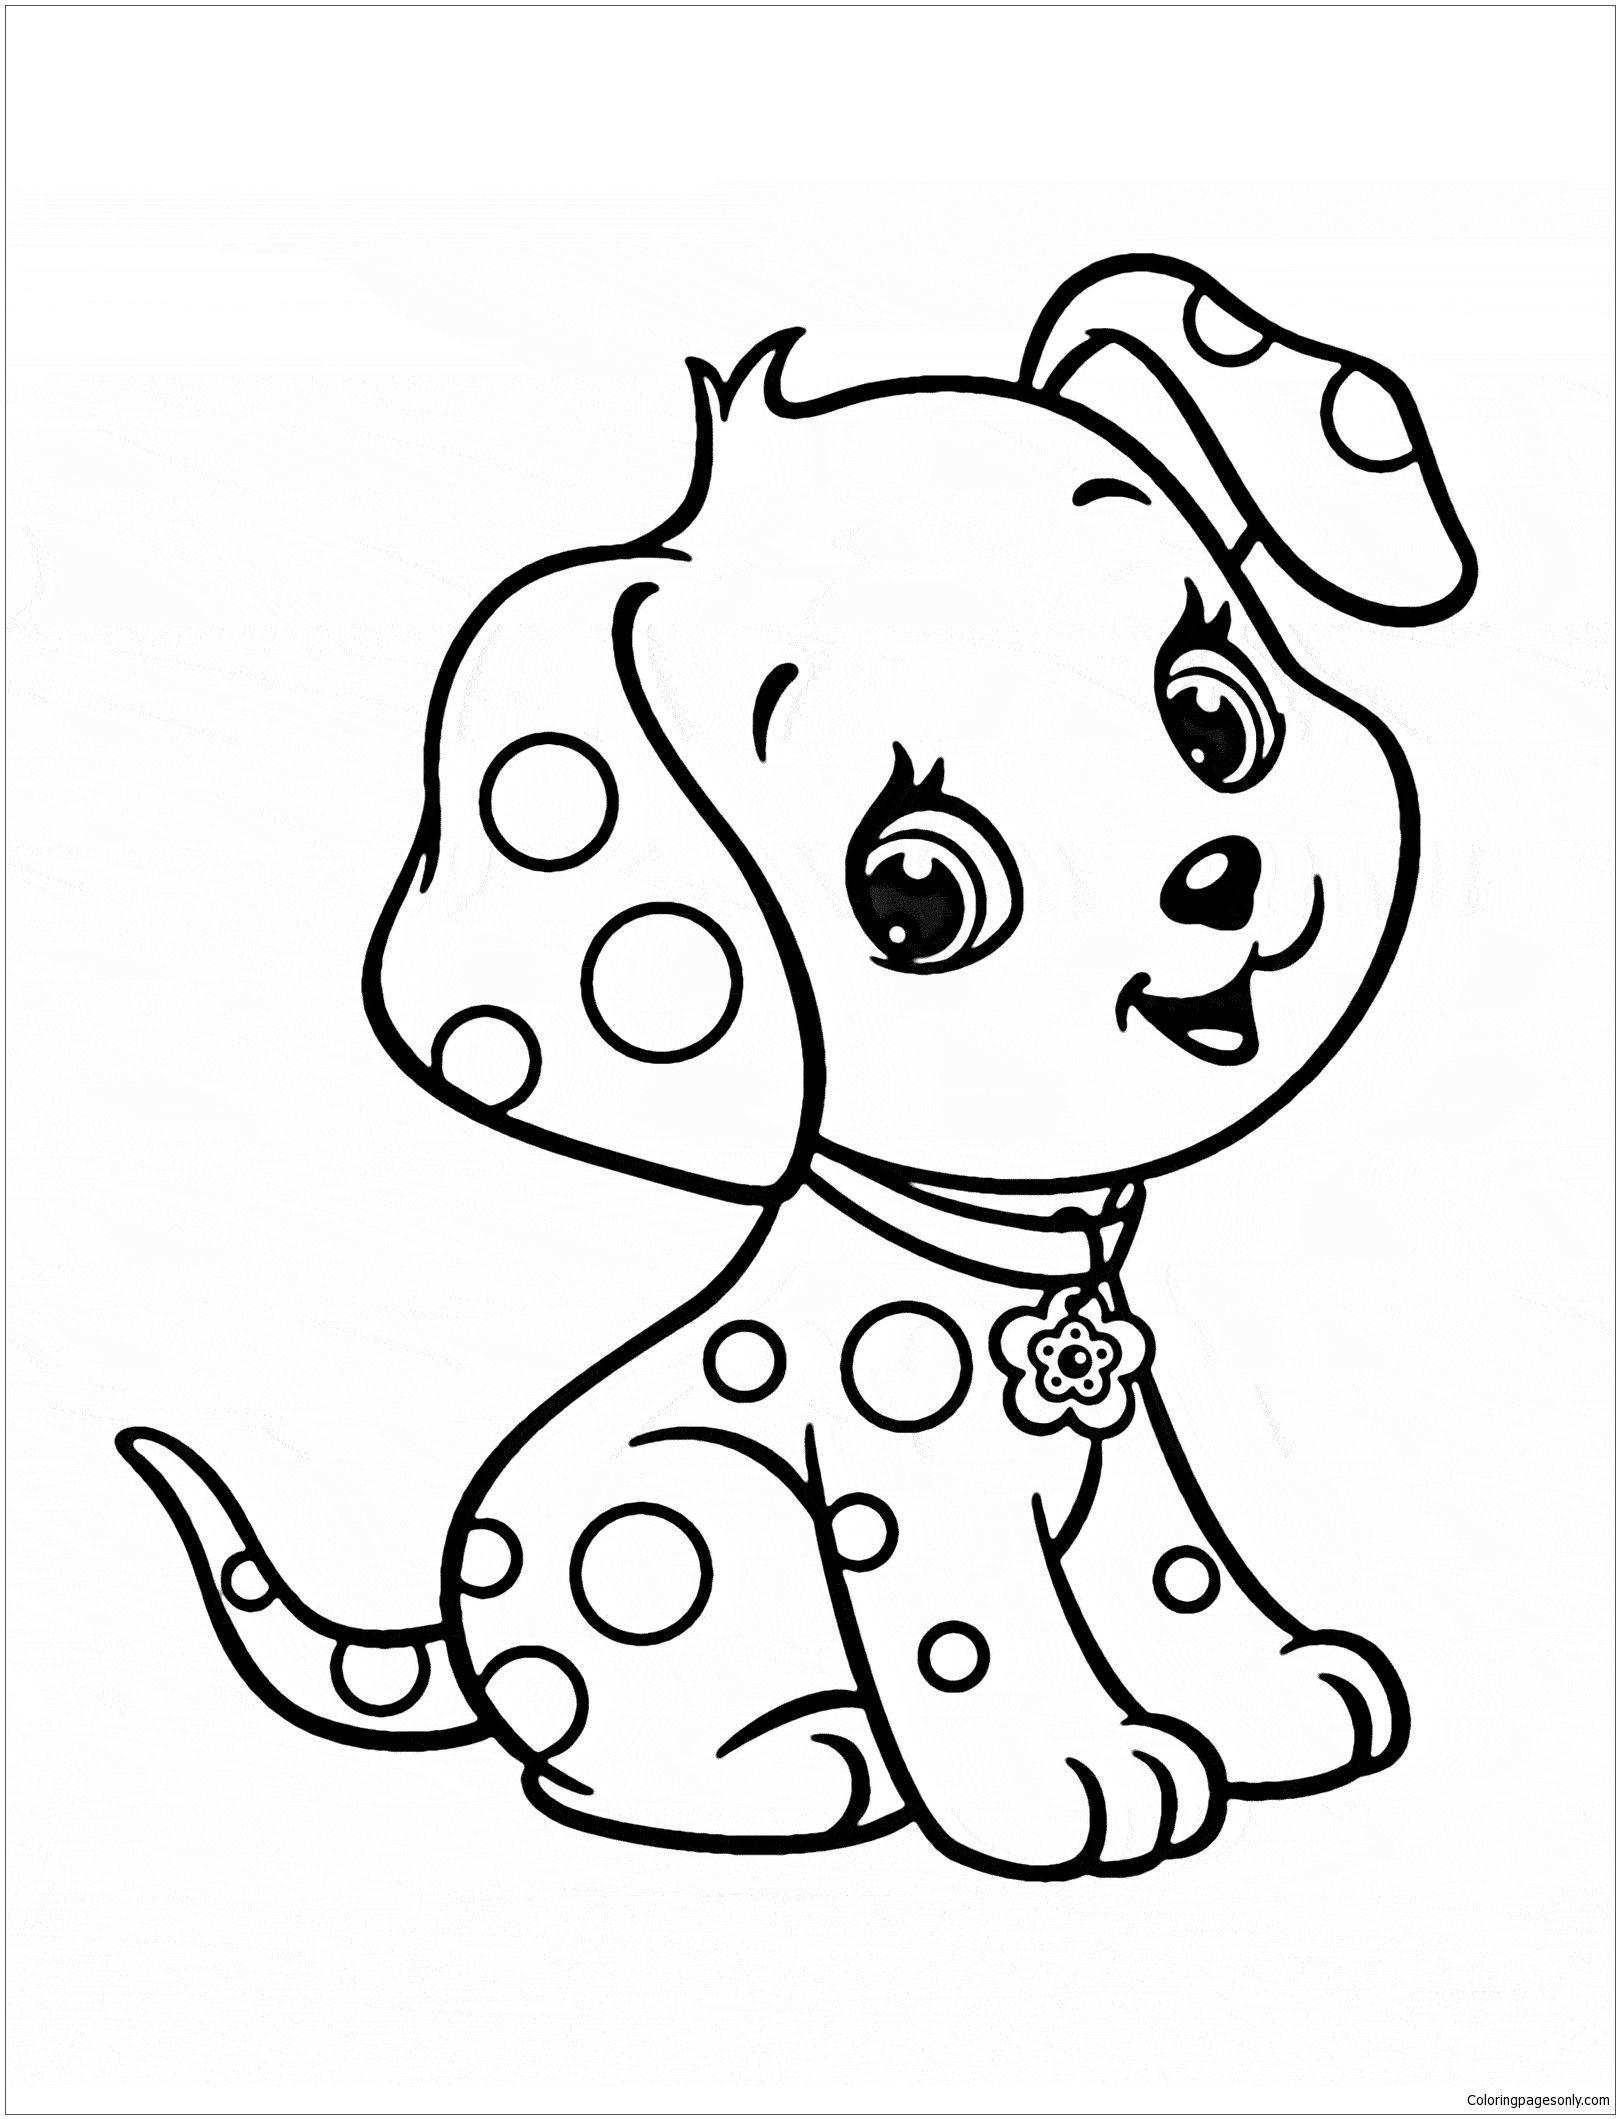 Cute Animal Coloring Pages Printable
 Cute Puppy 5 Coloring Page